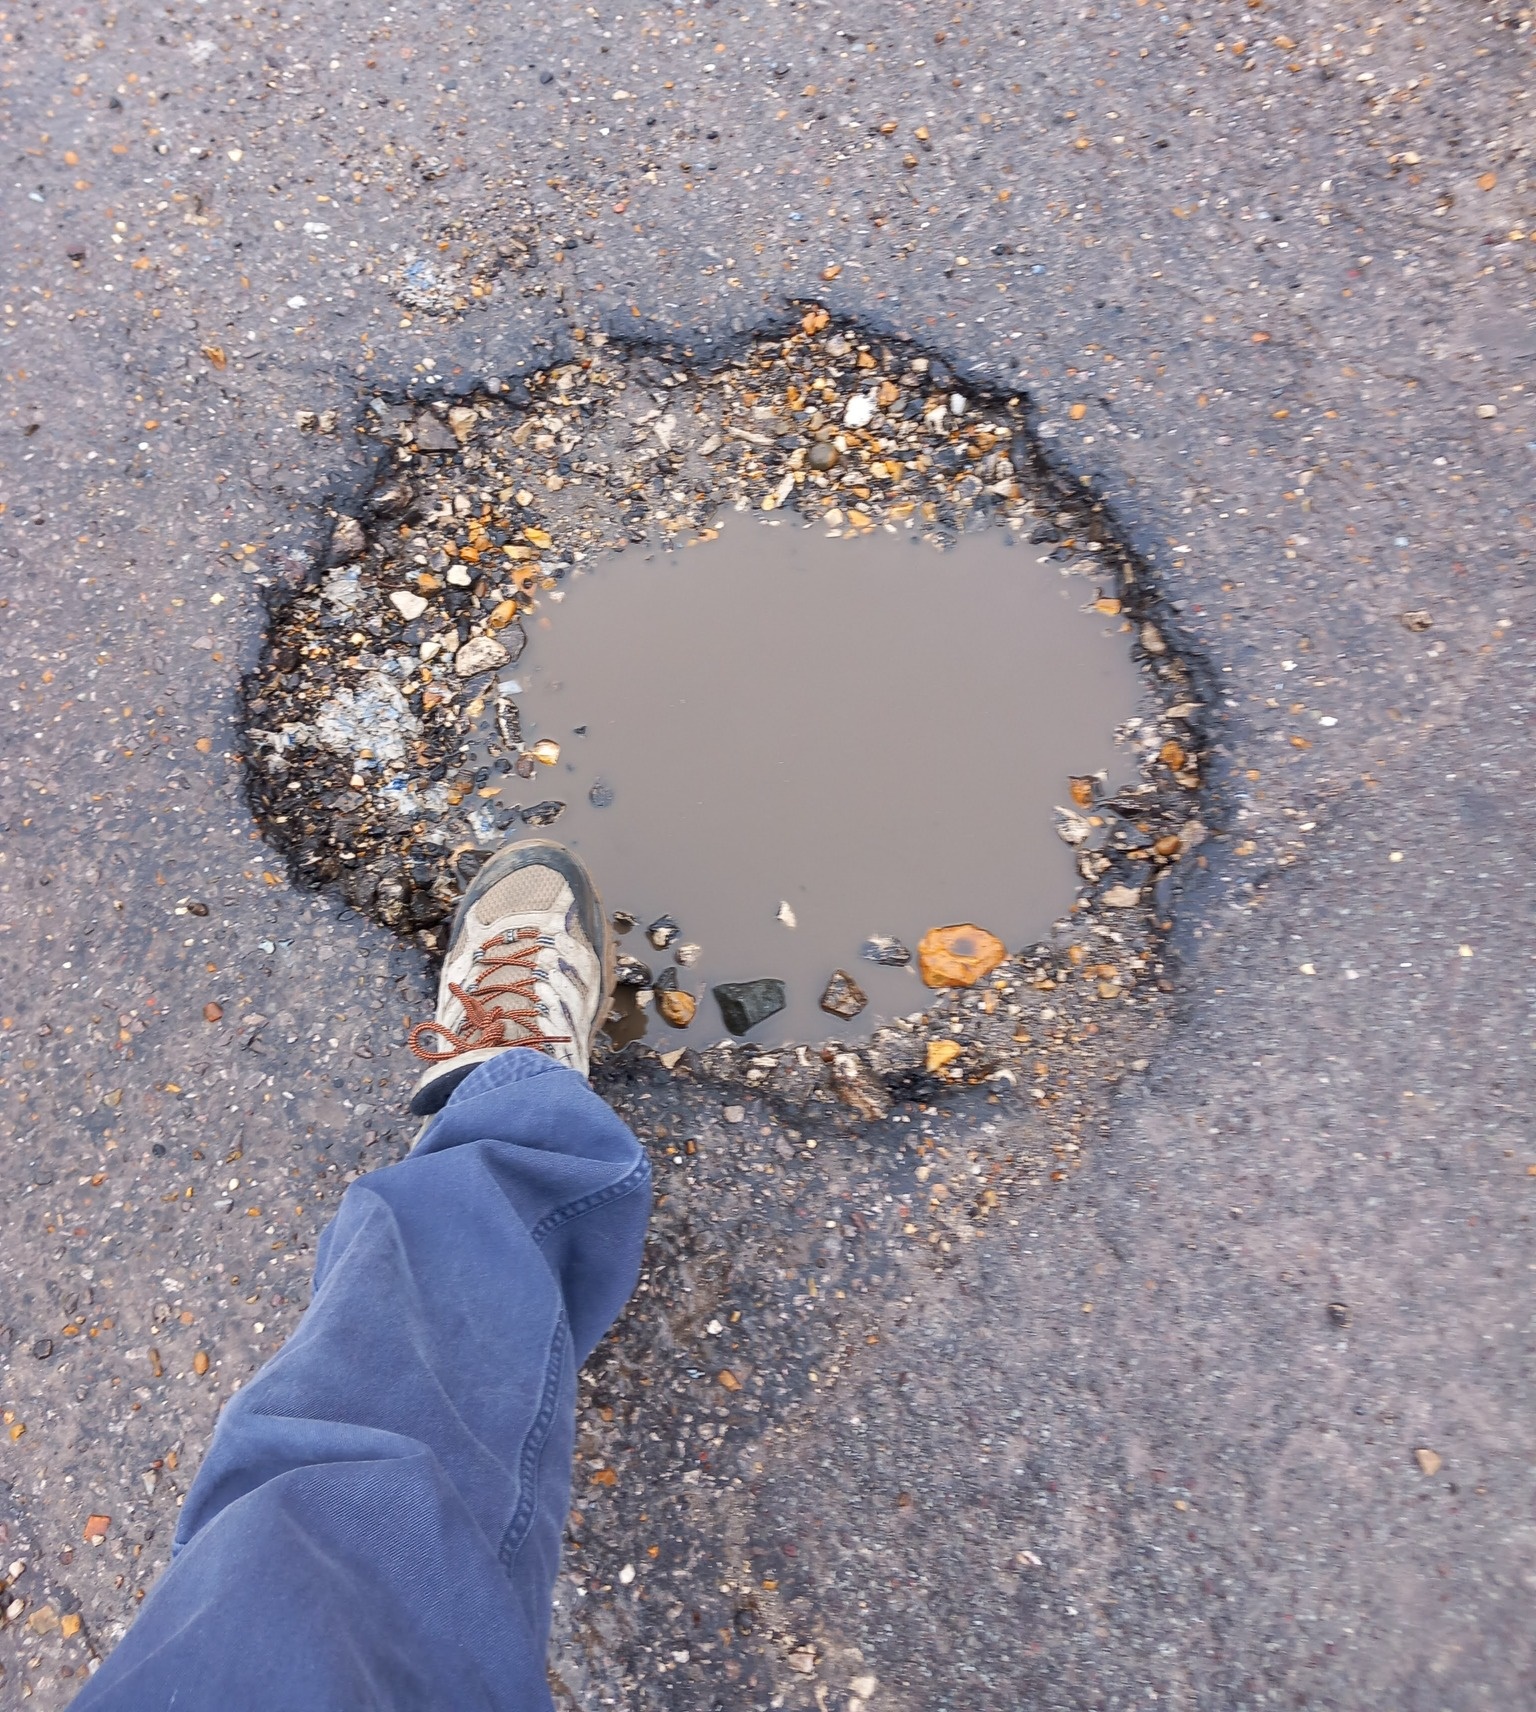 Another pothole in Winton East reported by Simon Bull